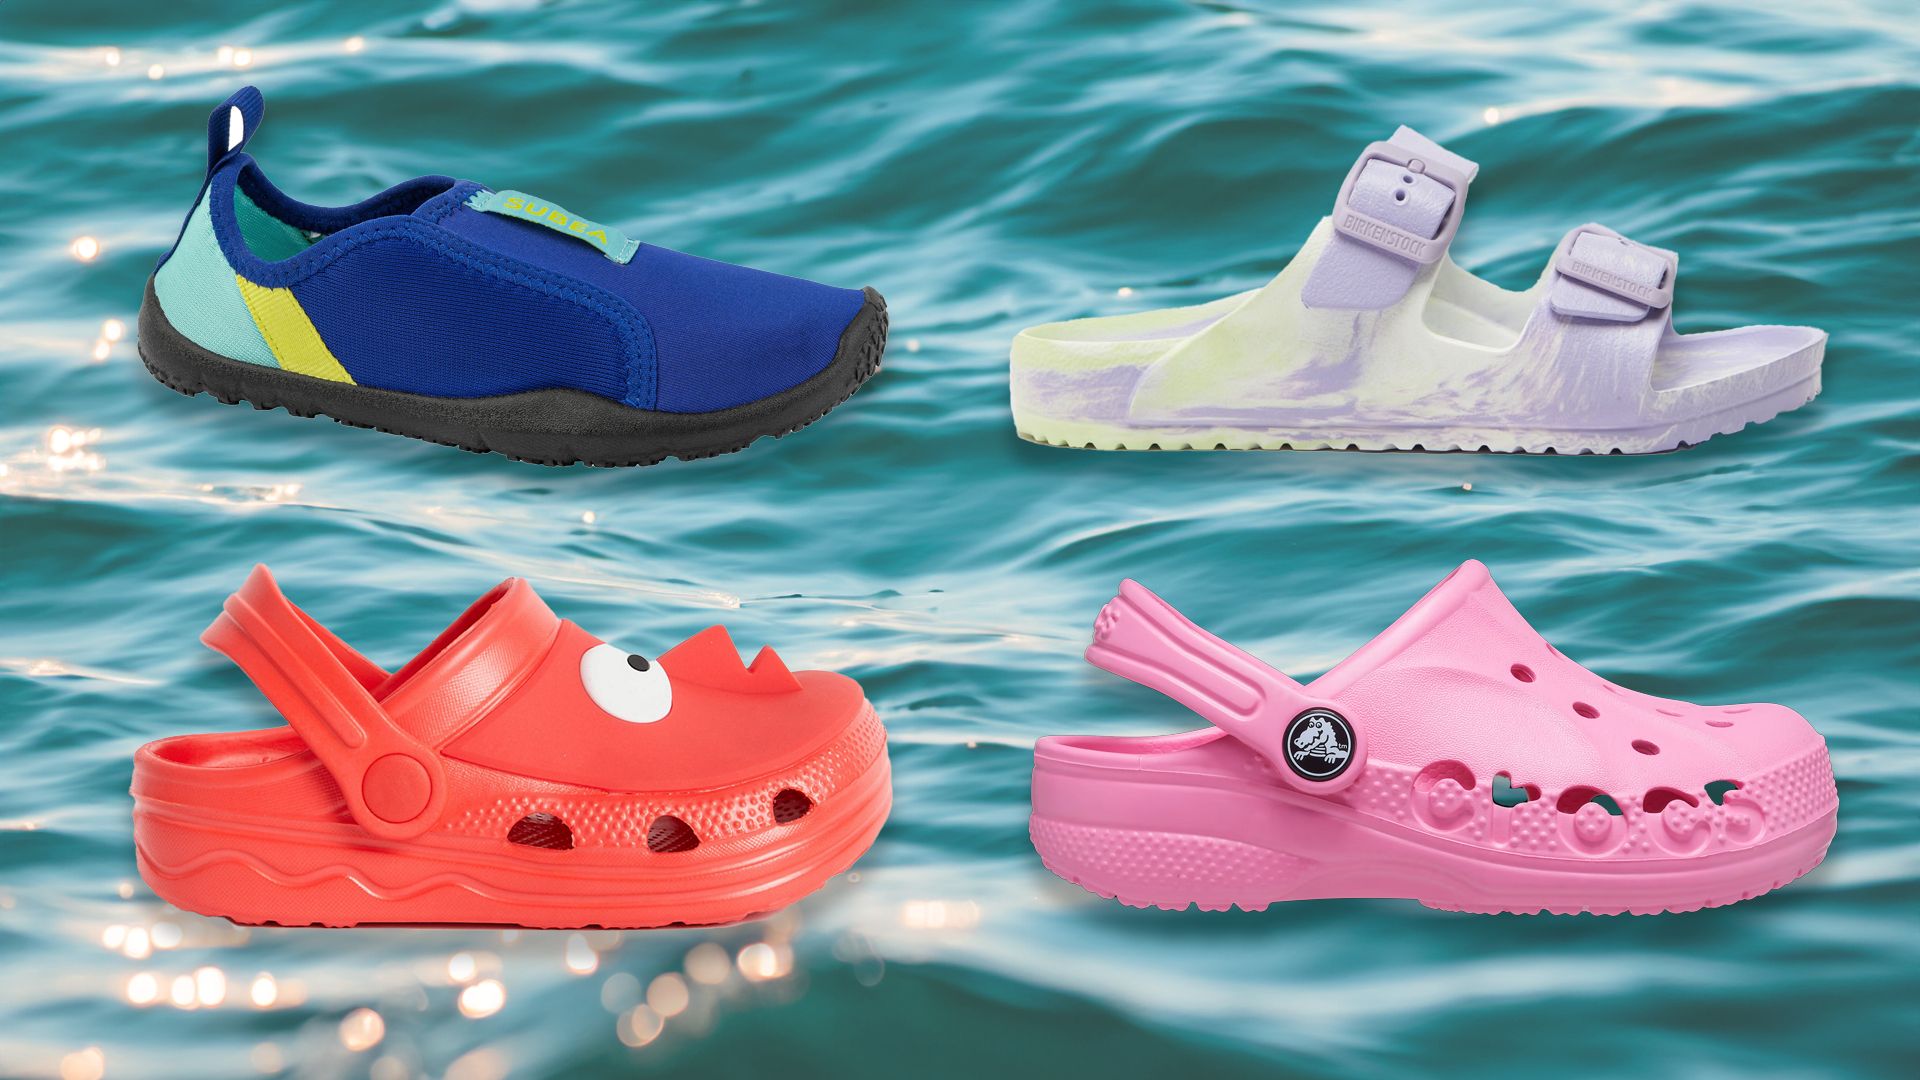 Best kids beach shoes & water shoes: Crocs, M&S sandals and more